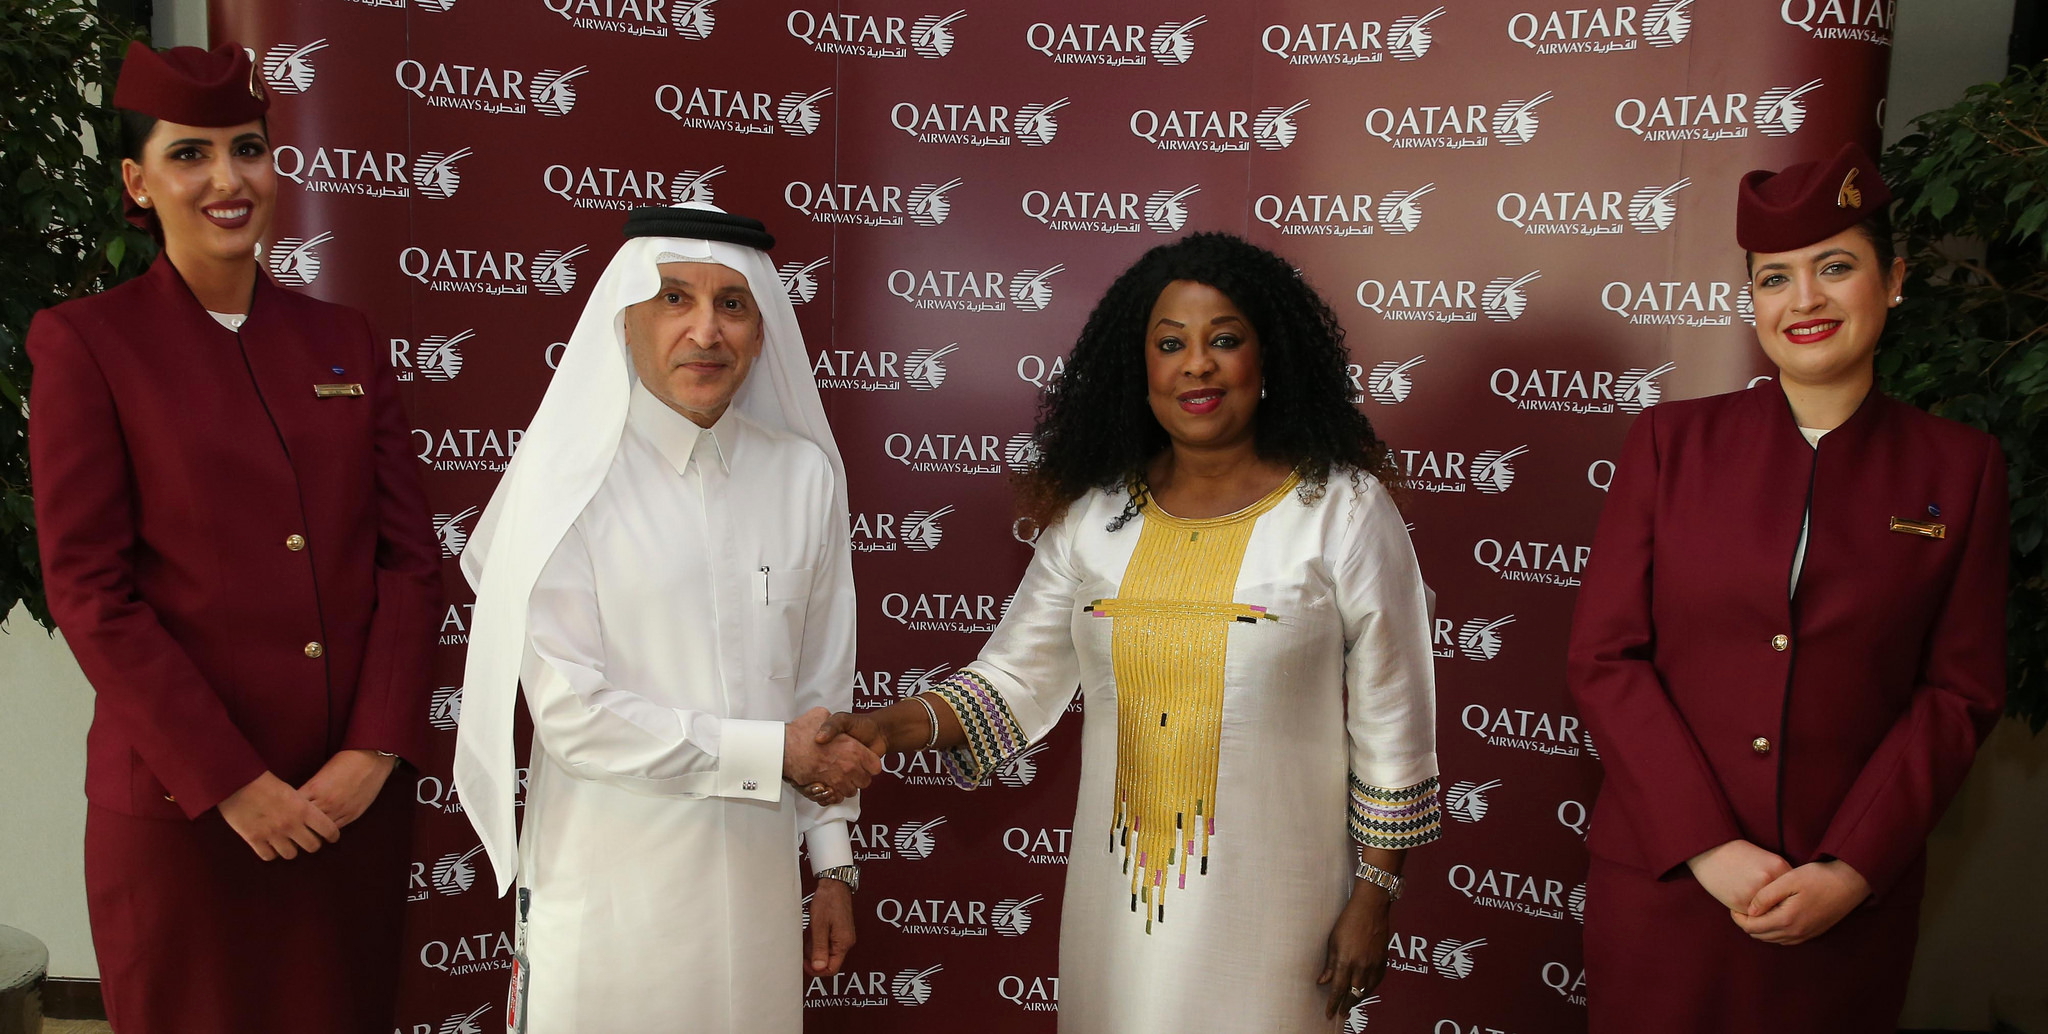 Pictured at the official signing ceremony of the new sponsorship agreement in Doha are Qatar Airways Group Chief Executive, Mr. Akbar Al Baker and FIFA Secretary General, Ms. Fatma Samoura.